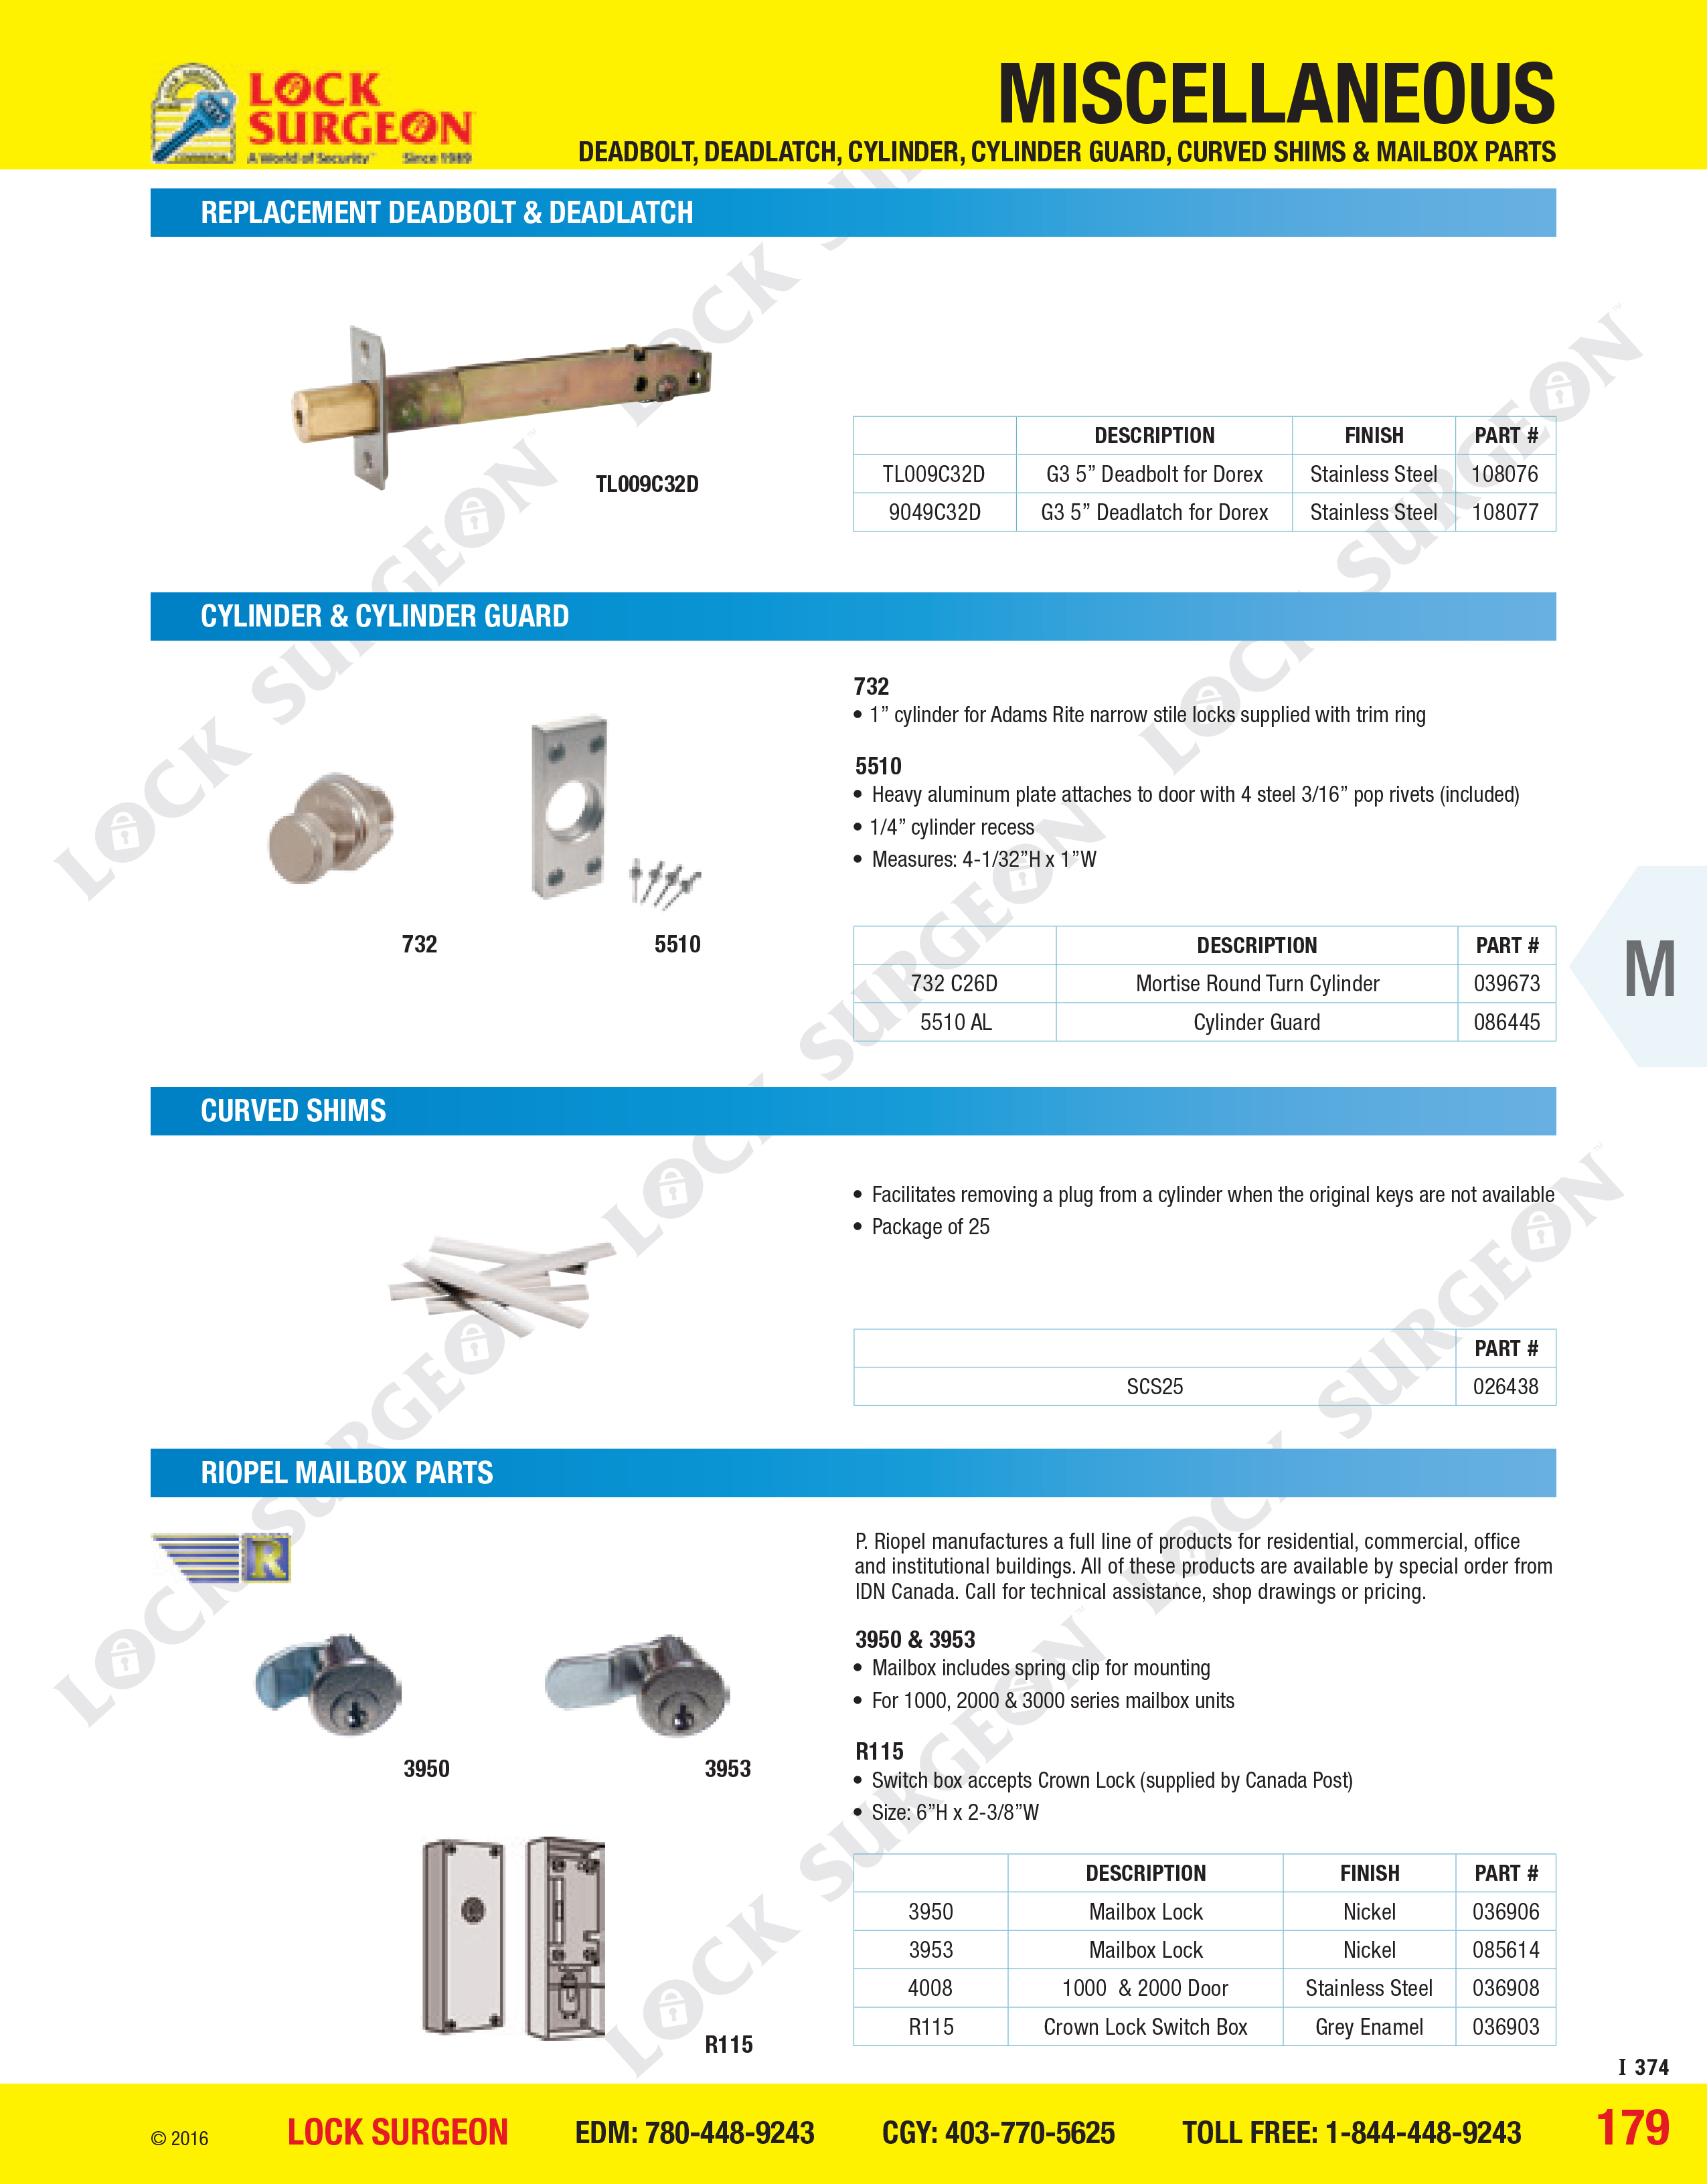 Miscellaneous parts for door deadbolts, deadlatches, cylinders and cylinder-guards.